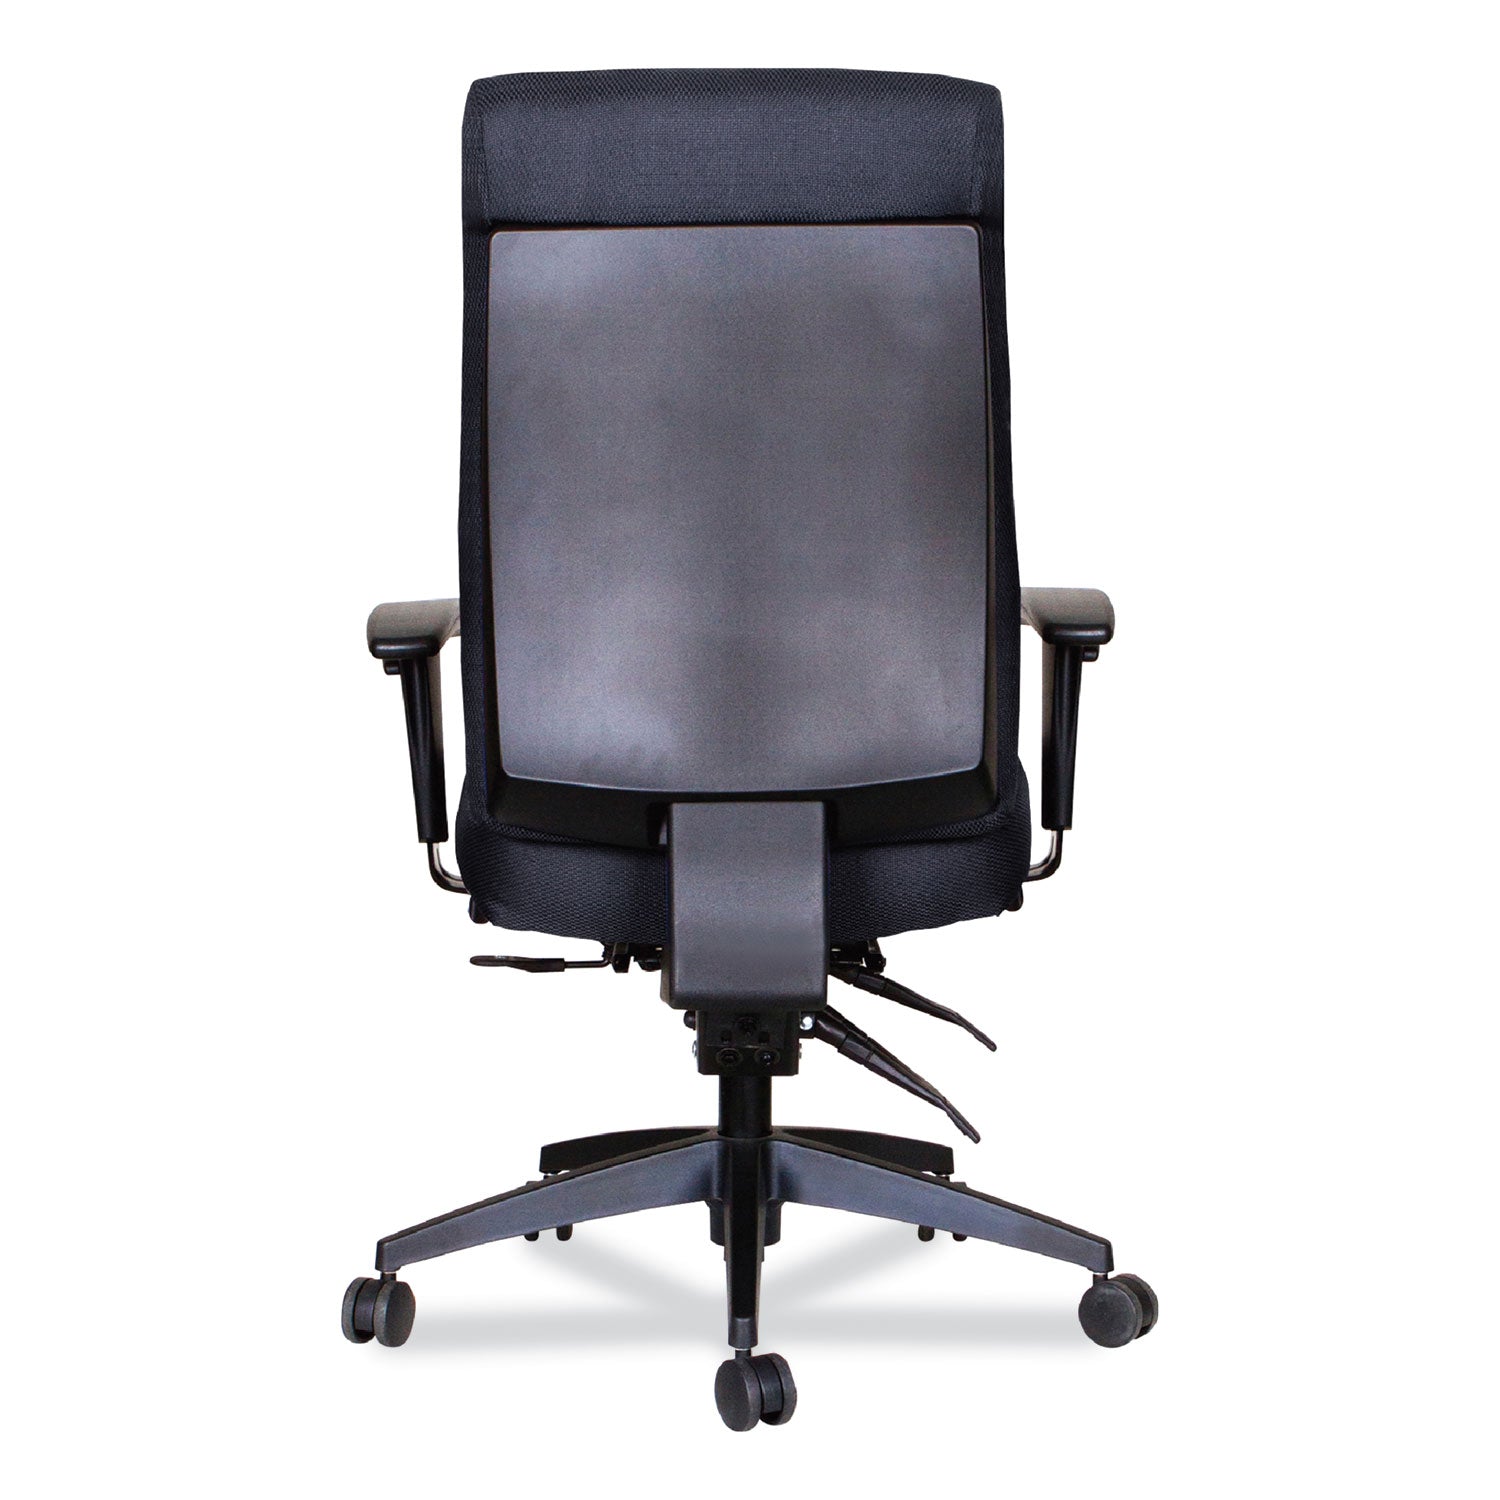 alera-wrigley-series-high-performance-high-back-multifunction-task-chair-supports-275-lb-187-to-2224-seat-height-black_alehpm4101 - 7